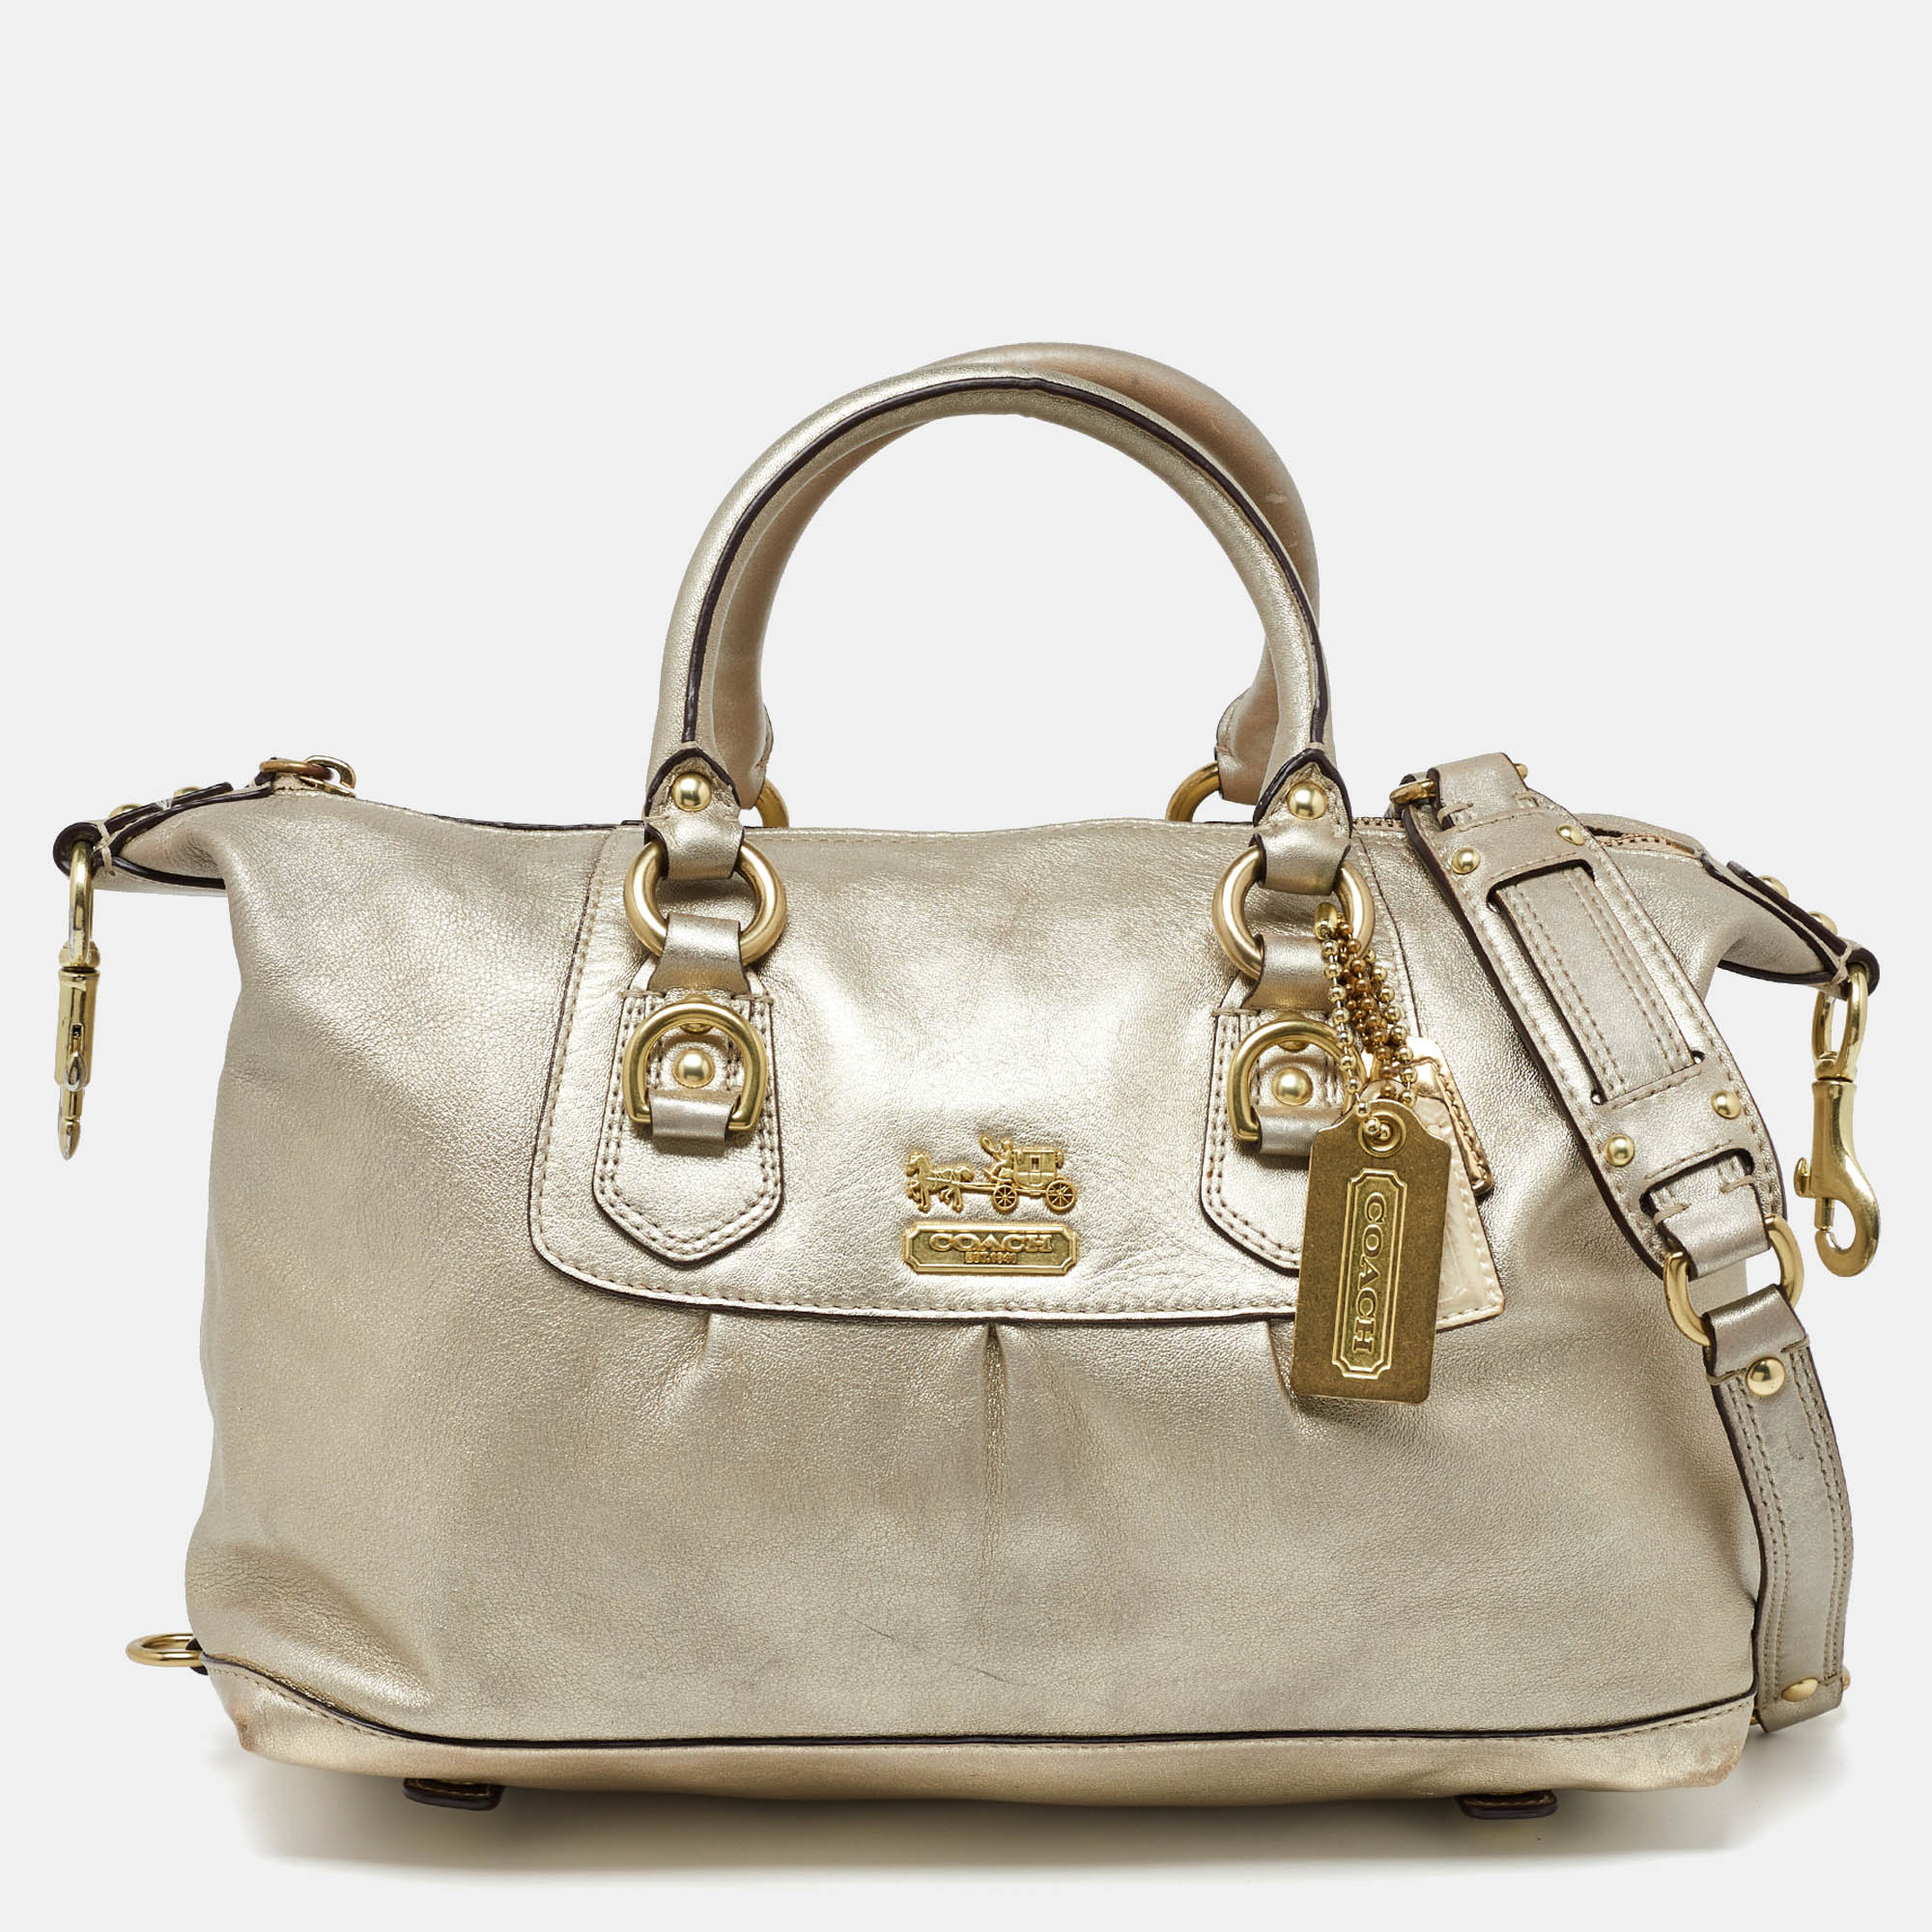 Thoughtful details high quality and everyday convenience mark this designer bag for women by Coach. The bag is sewn with skill to deliver a refined look and an impeccable finish.